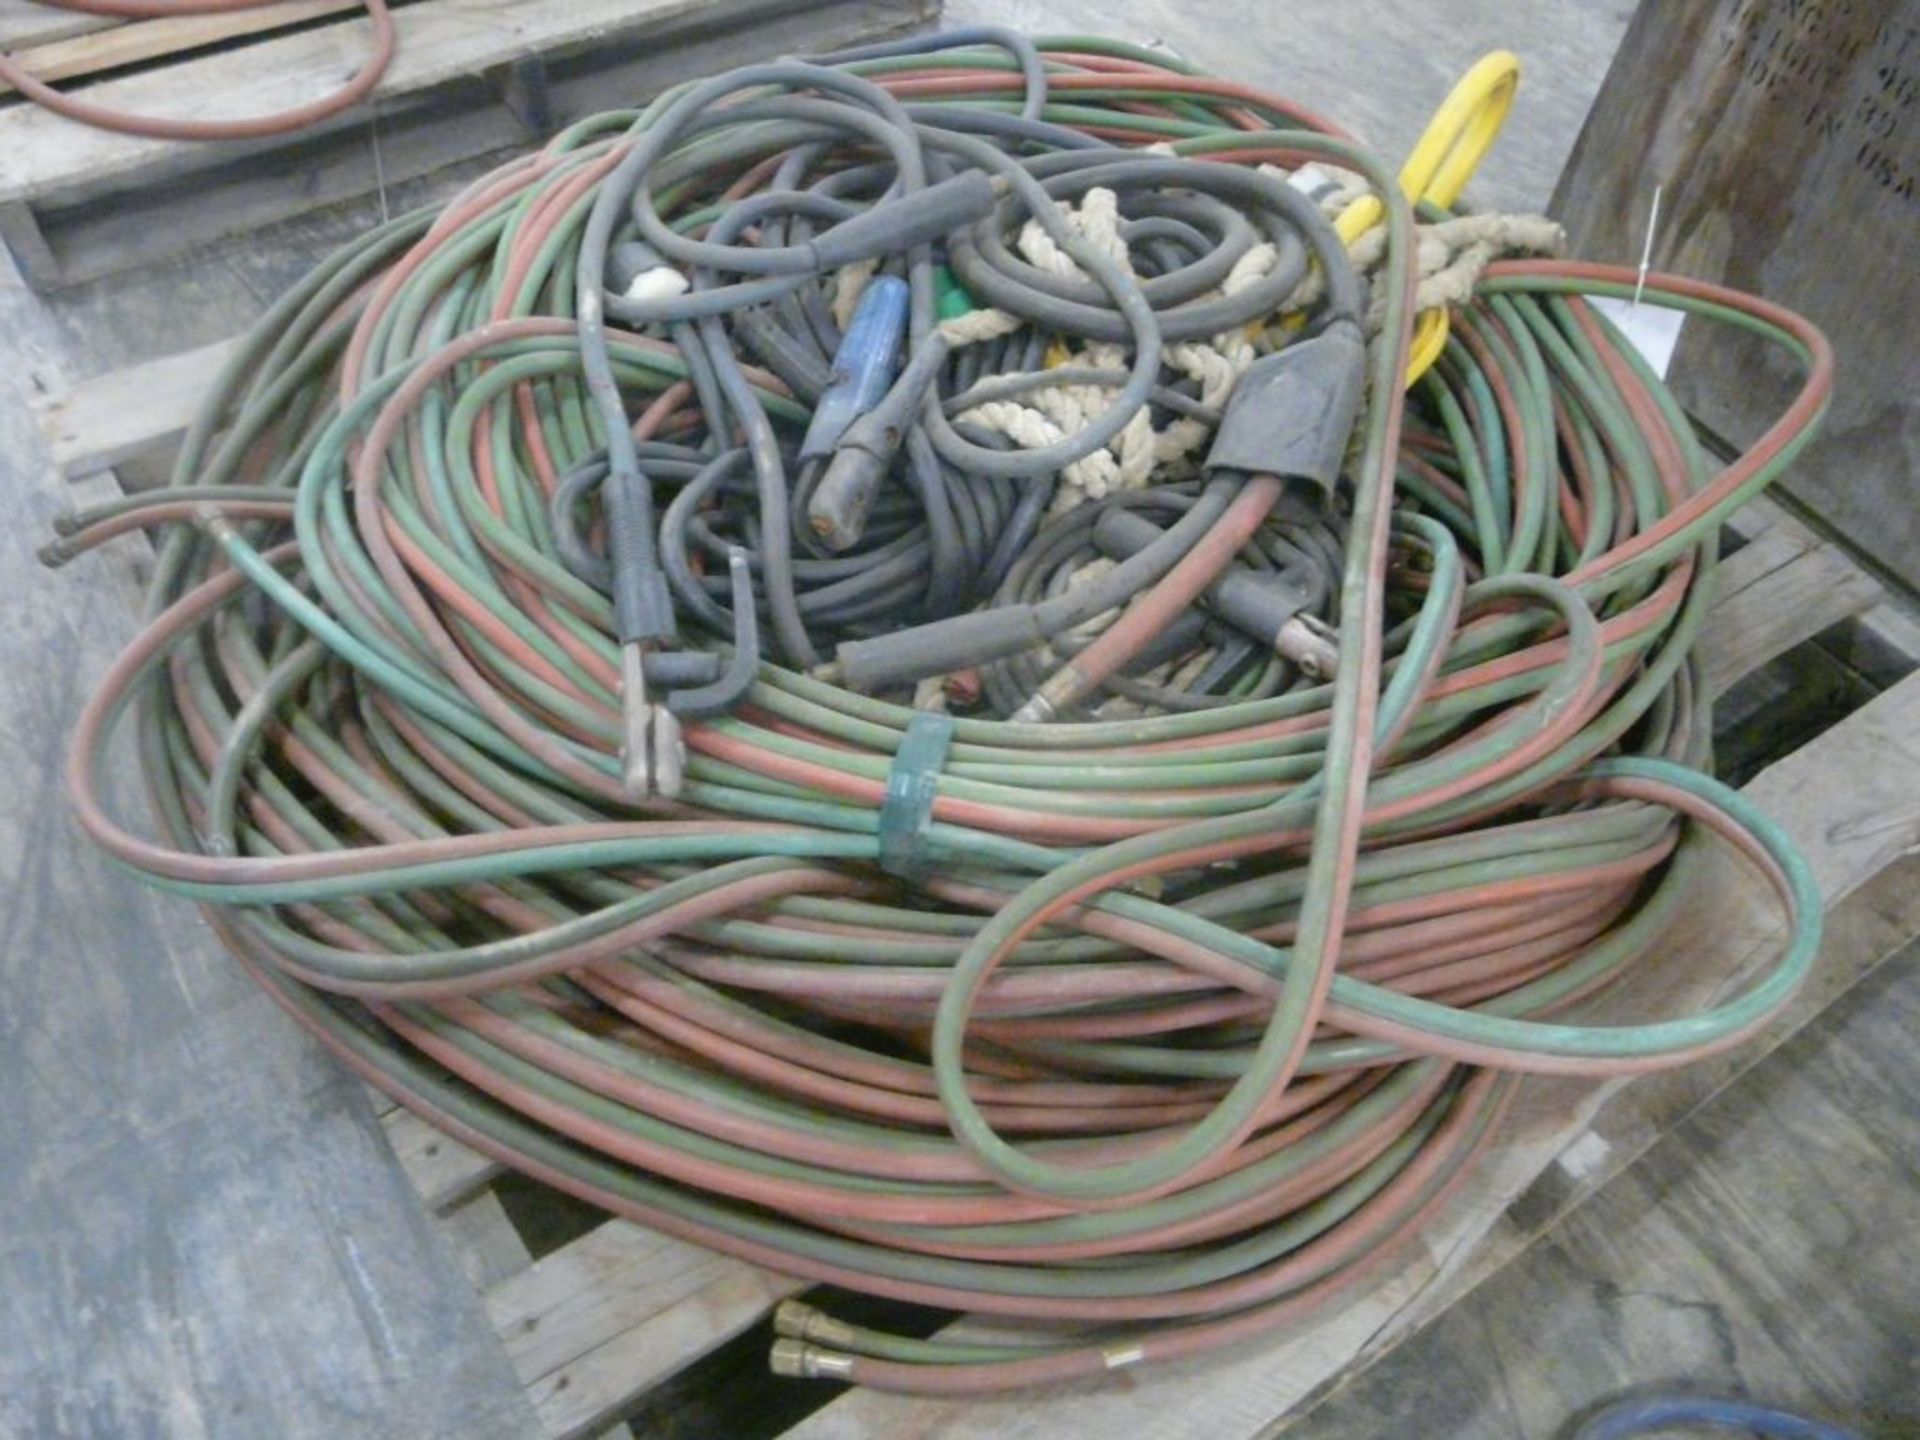 Lot of Assorted Leads, Power Cables, and Rope|144 lbs Including Pallet; Tag: 225338 - Image 2 of 4